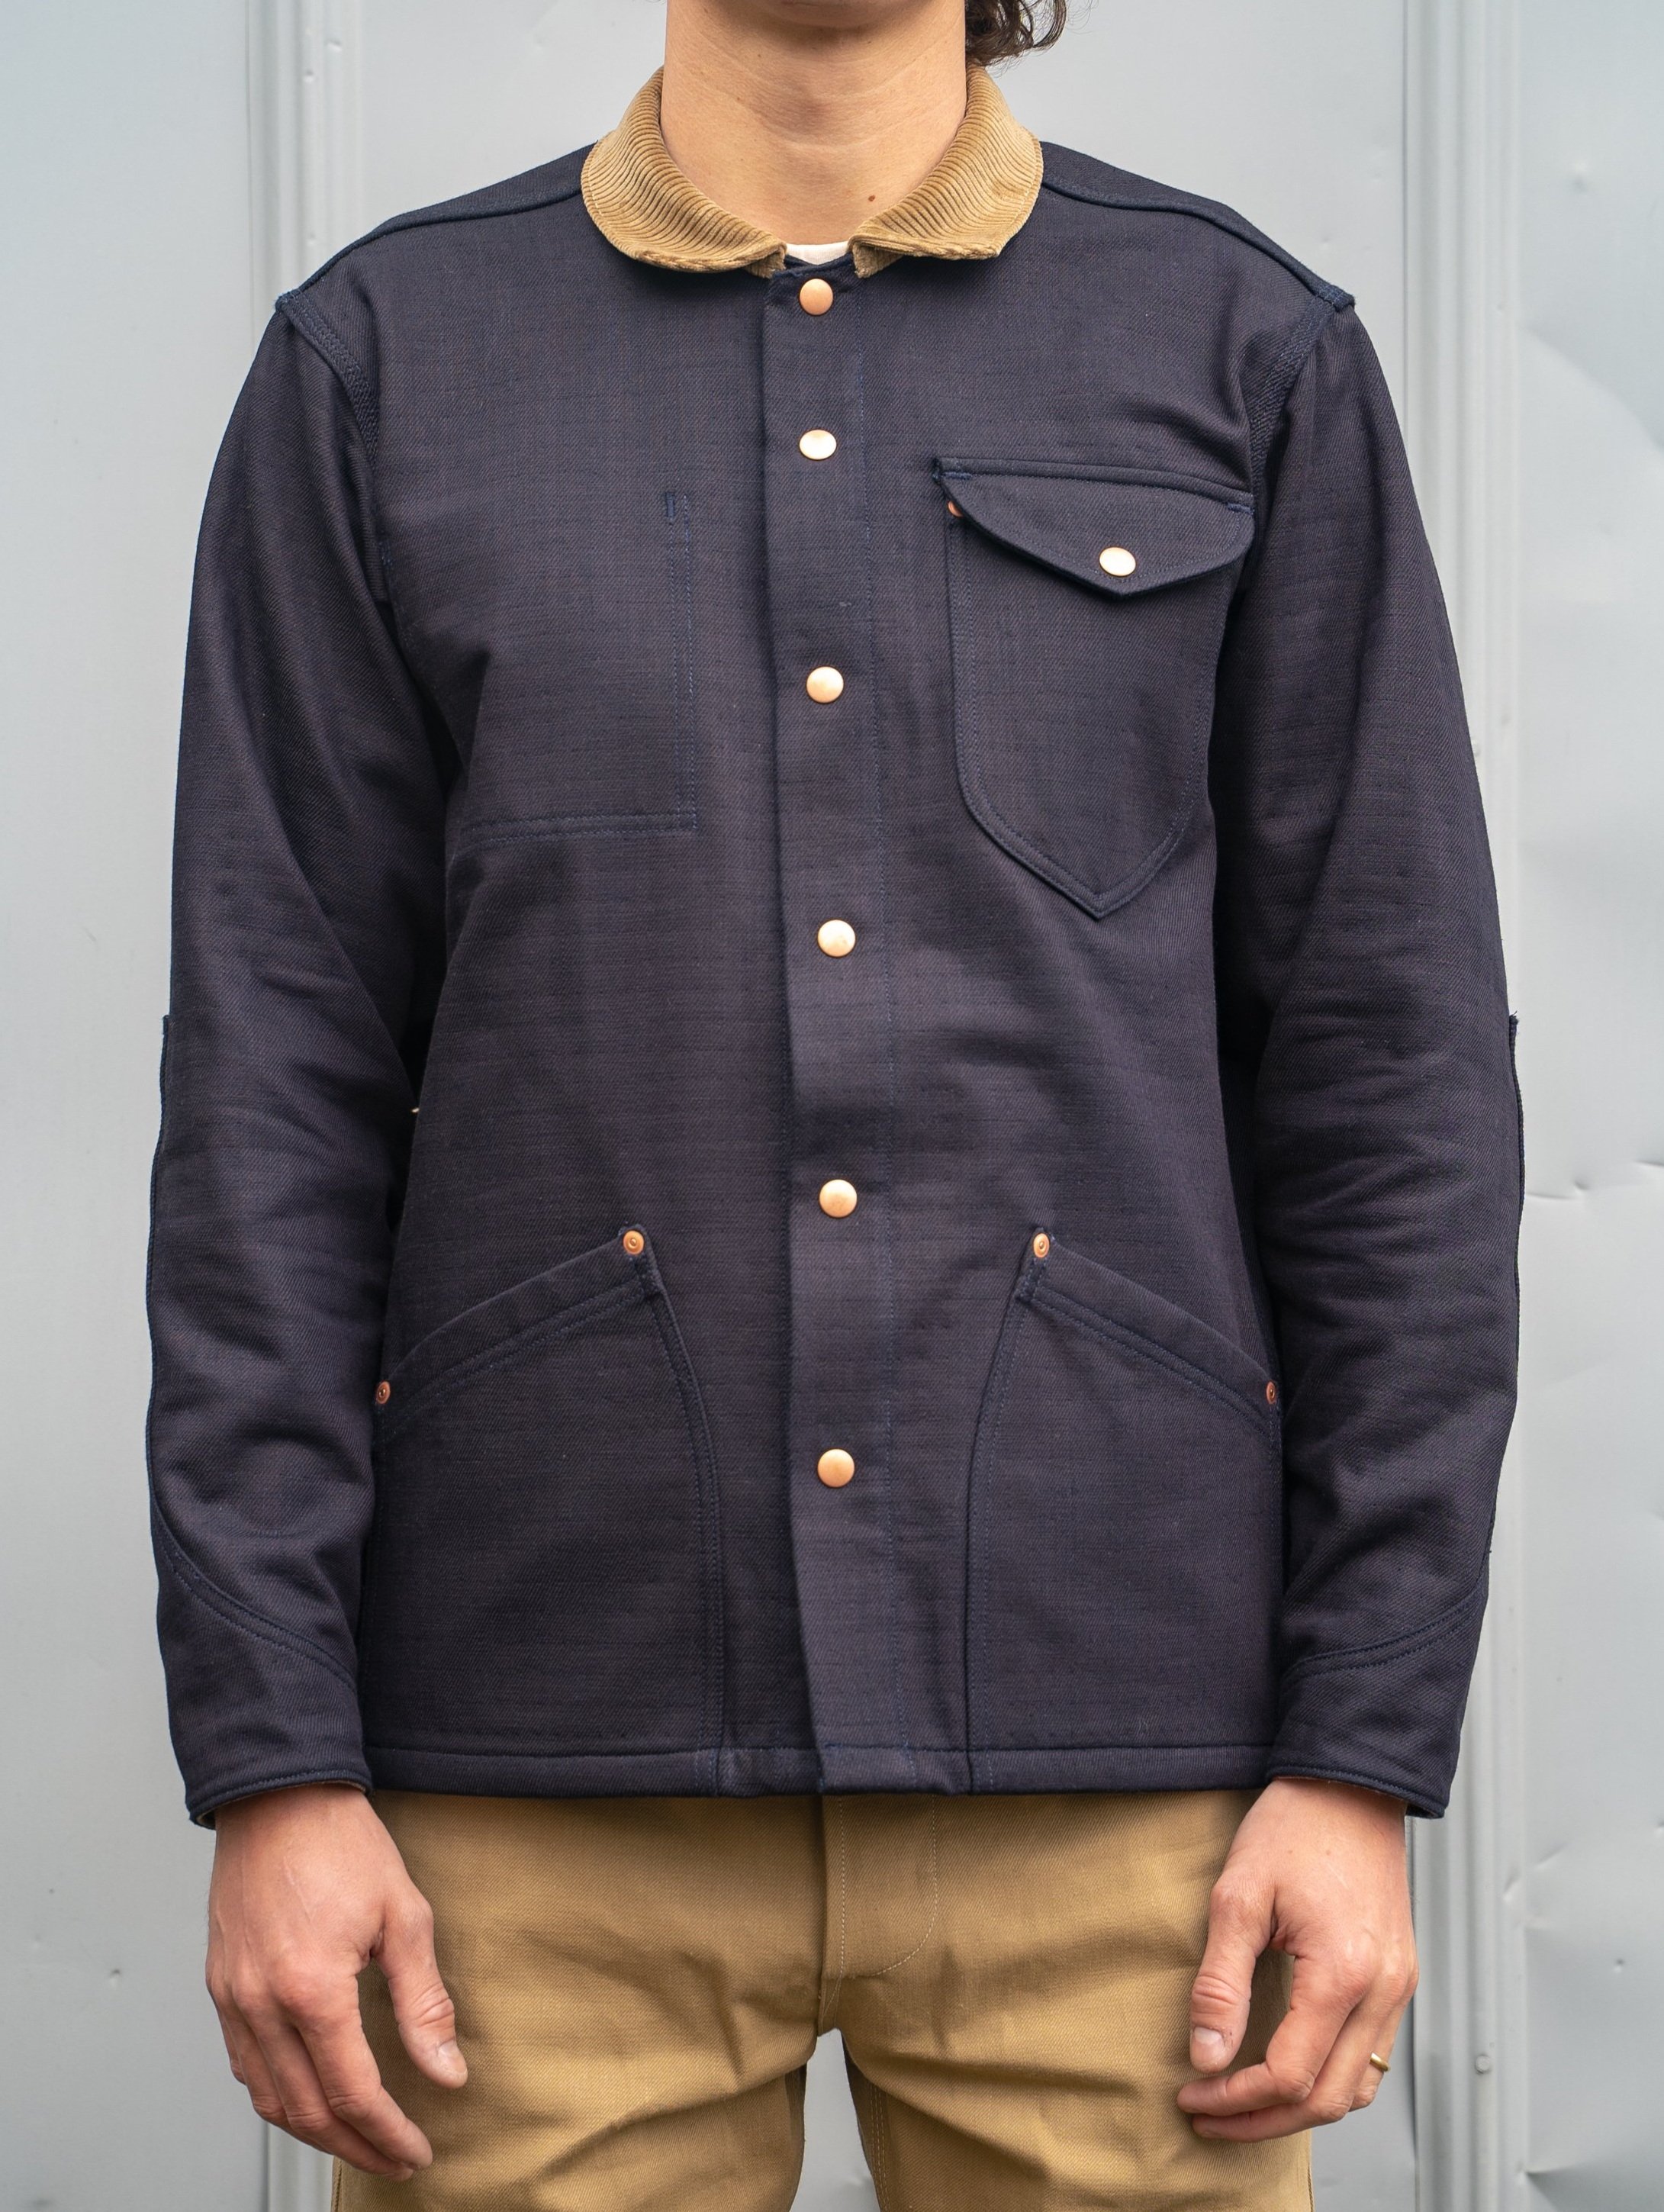 Orchard Coat - Flannel Lined Indigo Twill — GREASE POINT WORKWEAR